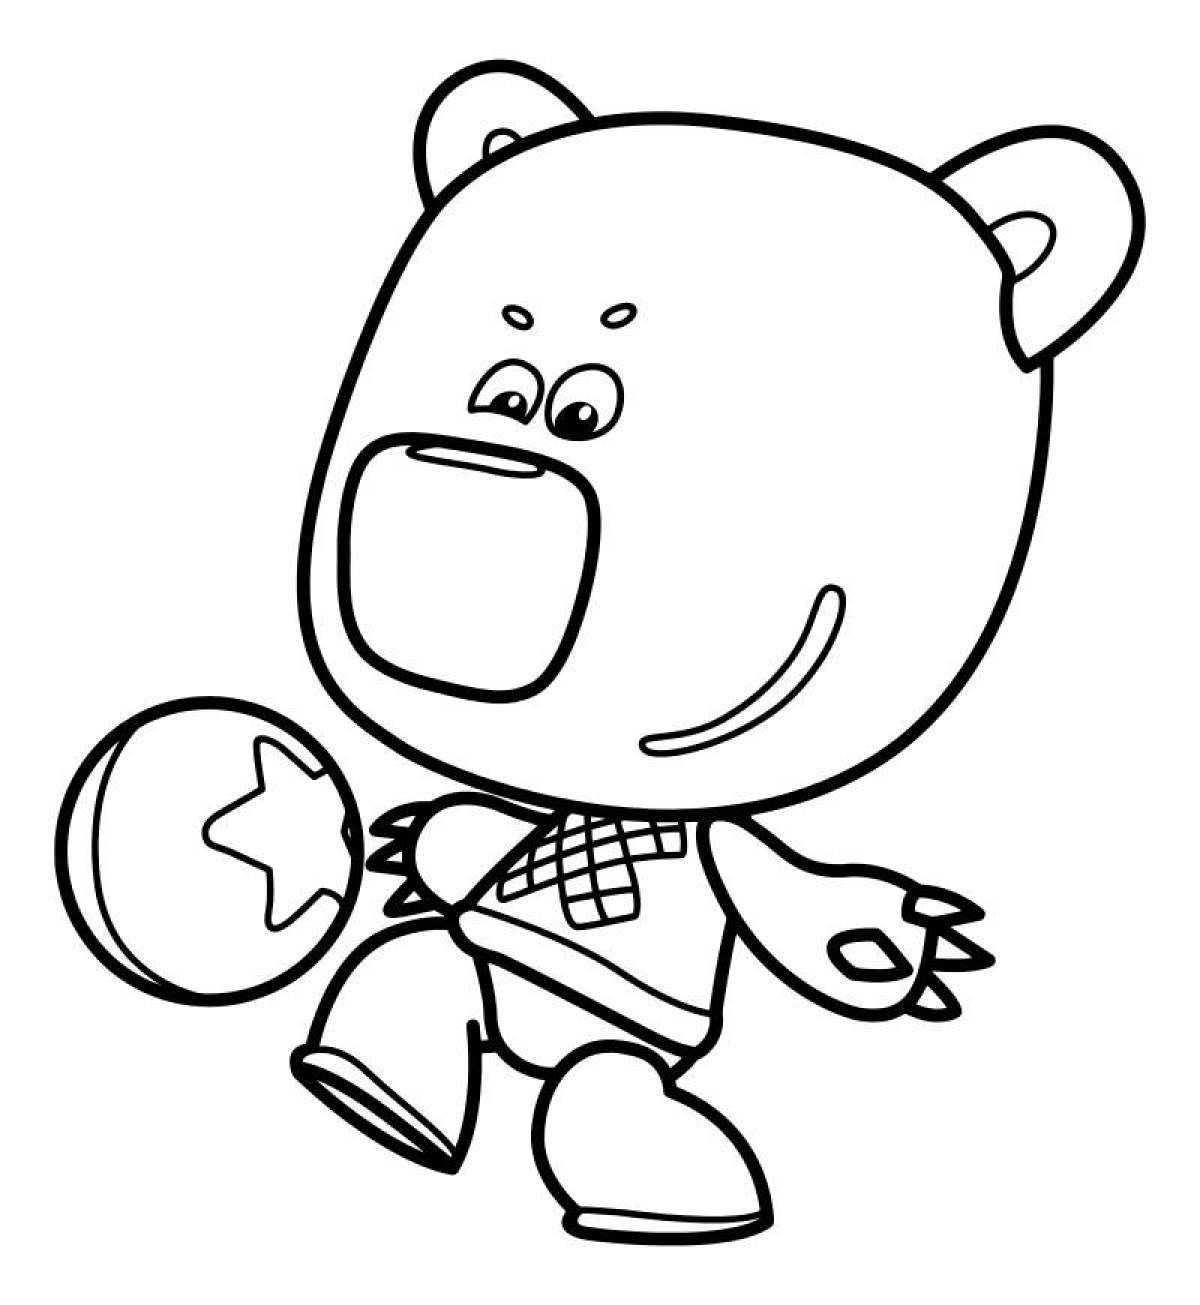 Bright bear coloring pages